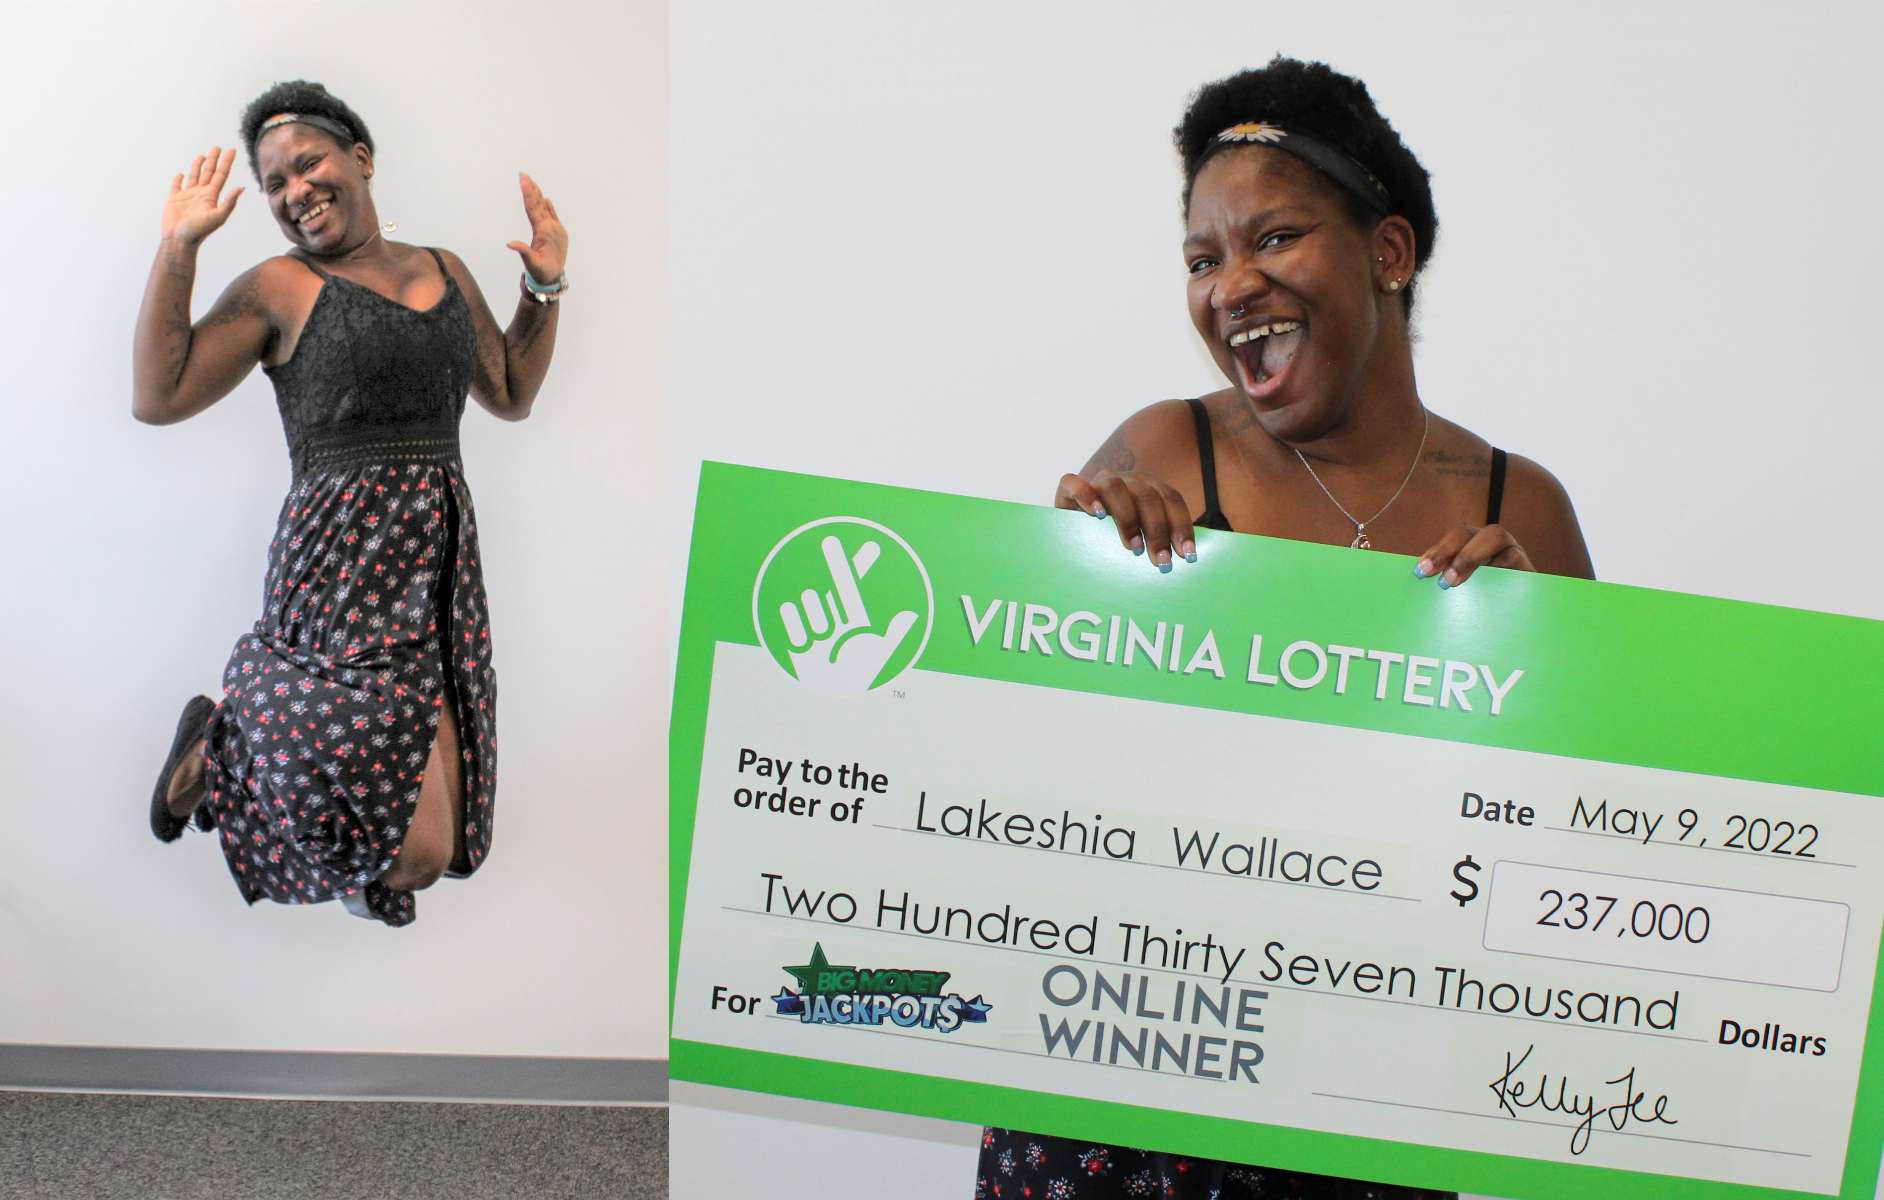 The Craziest Lottery Wins in Go Lotter's History